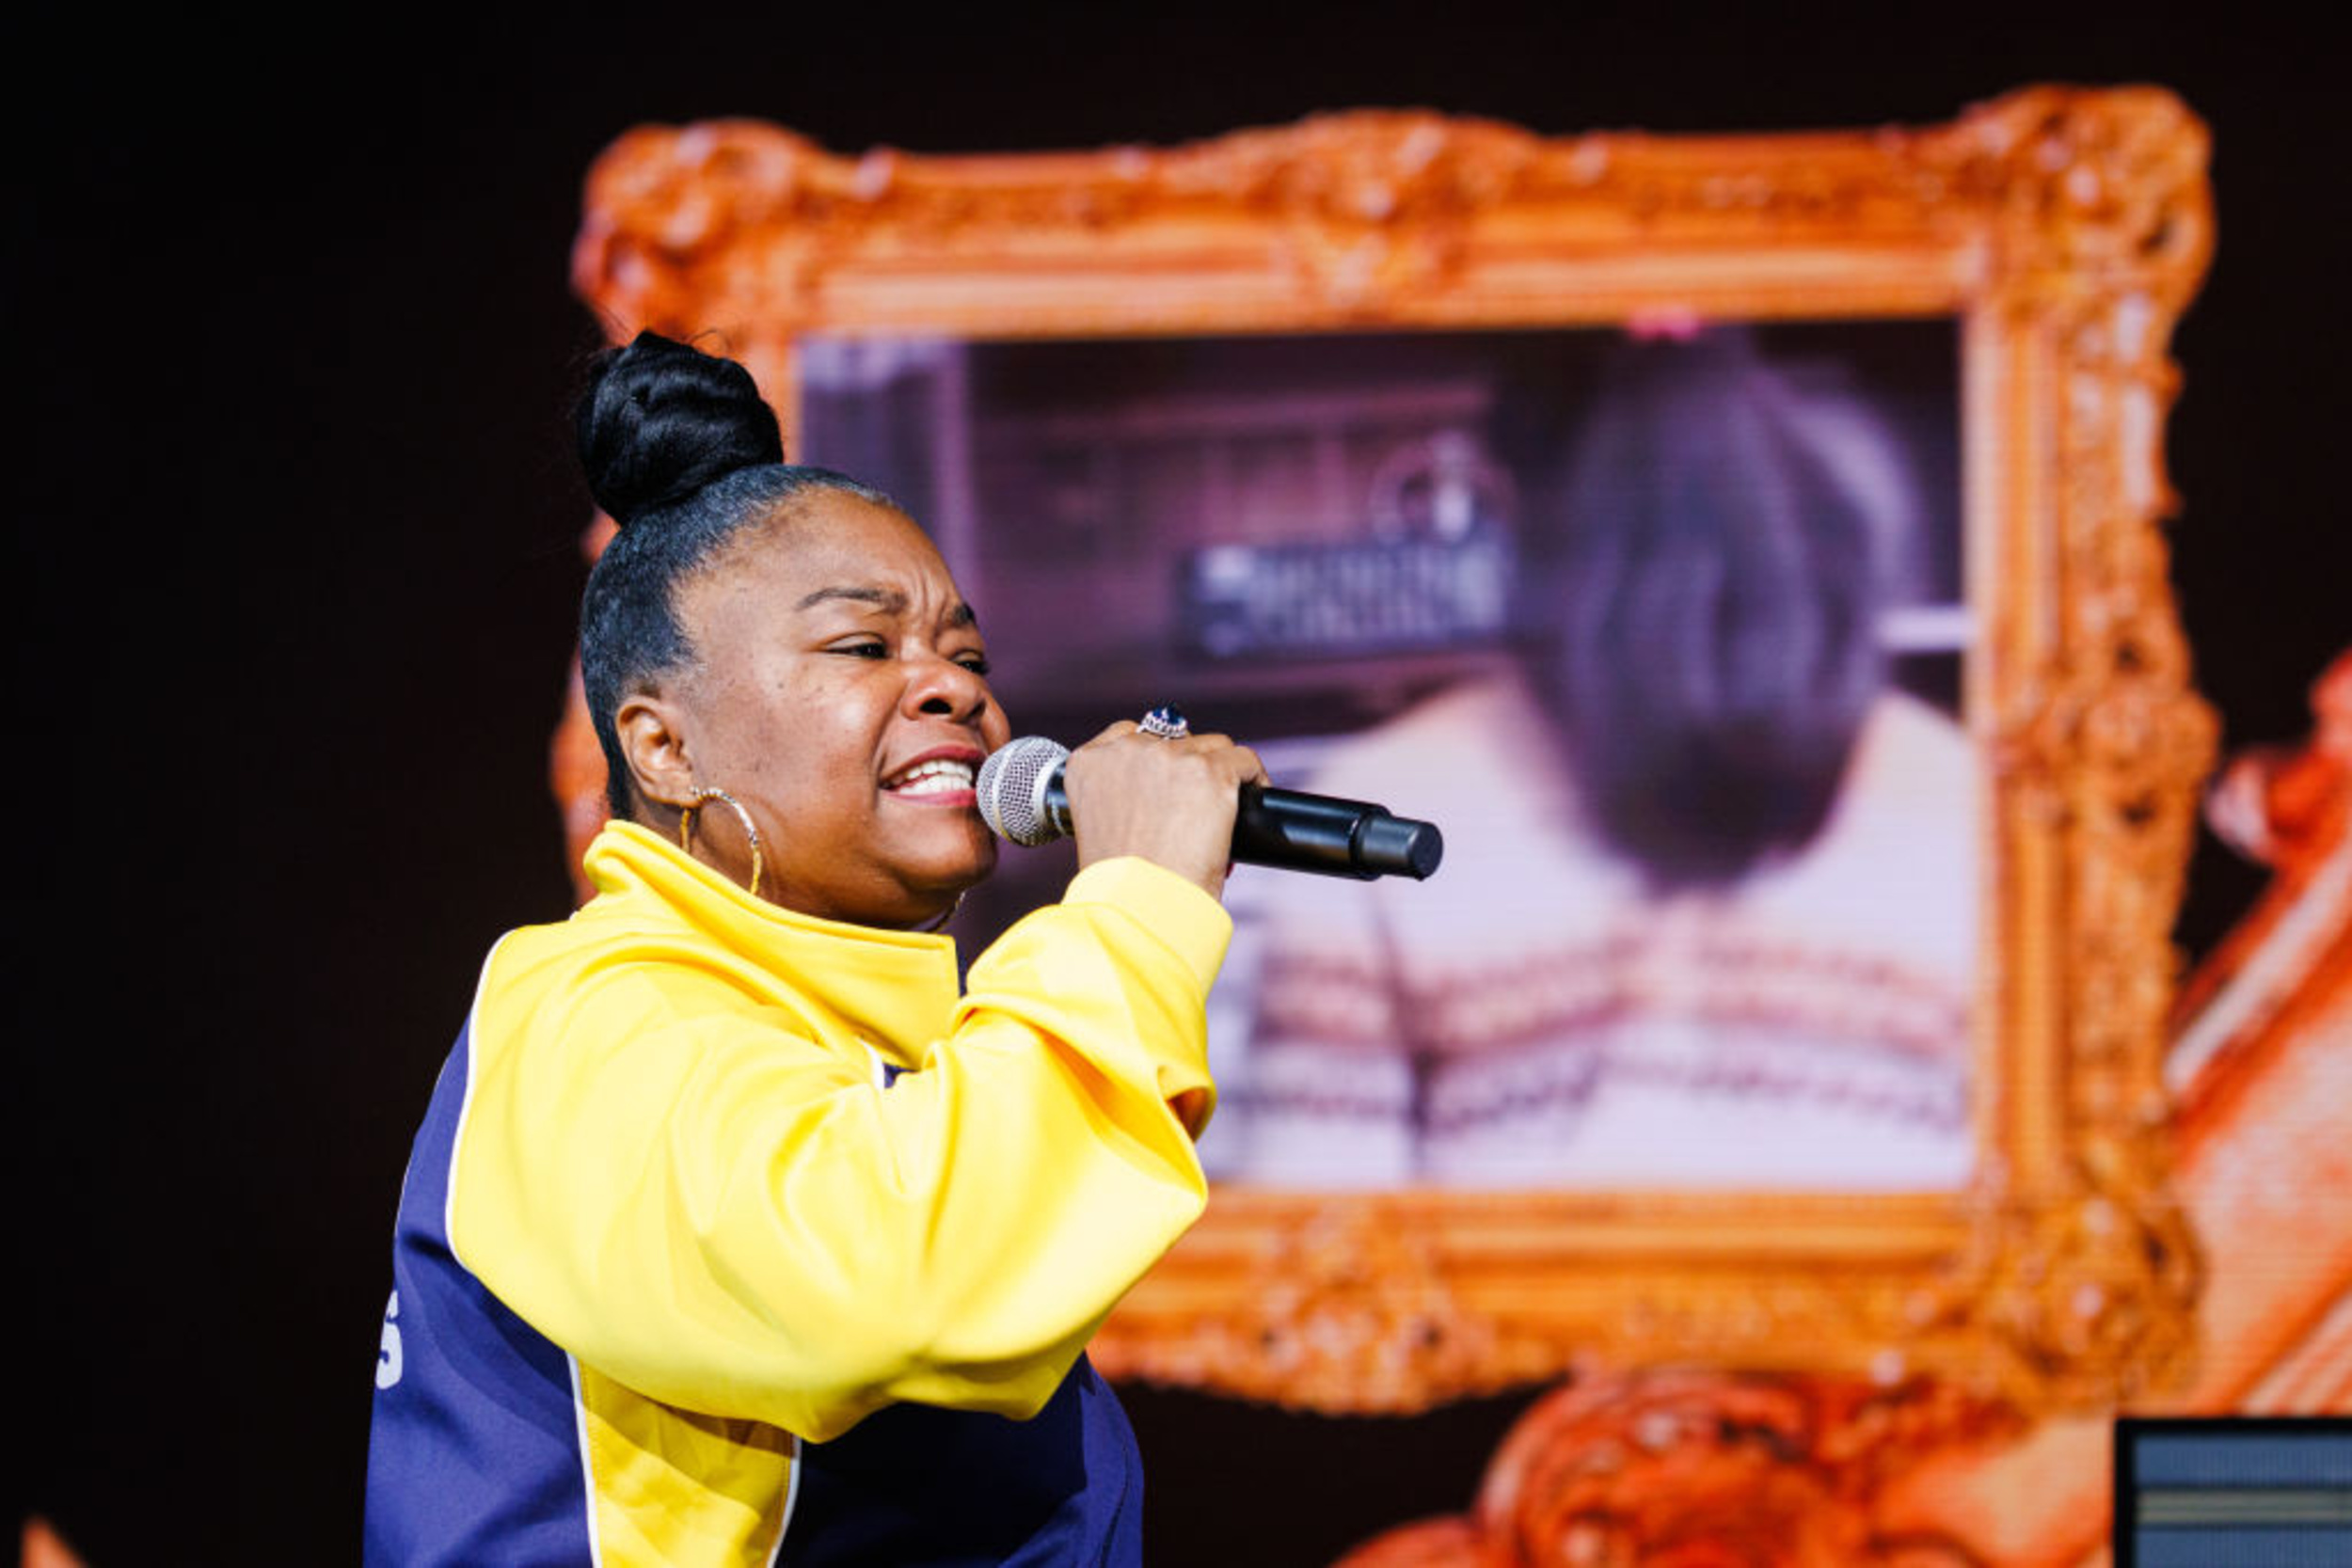 <p>When it comes to rap beefs, diss tracks, and rappers not being afraid to call out their opps in a song, it goes back to Roxanne Shanté. She was just a teenager when she joined the hip-hop collective Juice Crew, including Marley Marl, Biz Markie, Big Daddy Kane, and Kool G Rap. Shanté became popular when she released the song "Roxanne's Revenge," a freestyle diss track in response to UTFO's "Roxanne Roxanne." Her track helped spark a slew of response records known as "The Roxanne Wars." </p><p><a href='https://www.msn.com/en-us/community/channel/vid-cj9pqbr0vn9in2b6ddcd8sfgpfq6x6utp44fssrv6mc2gtybw0us'>Follow us on MSN to see more of our exclusive entertainment content.</a></p>